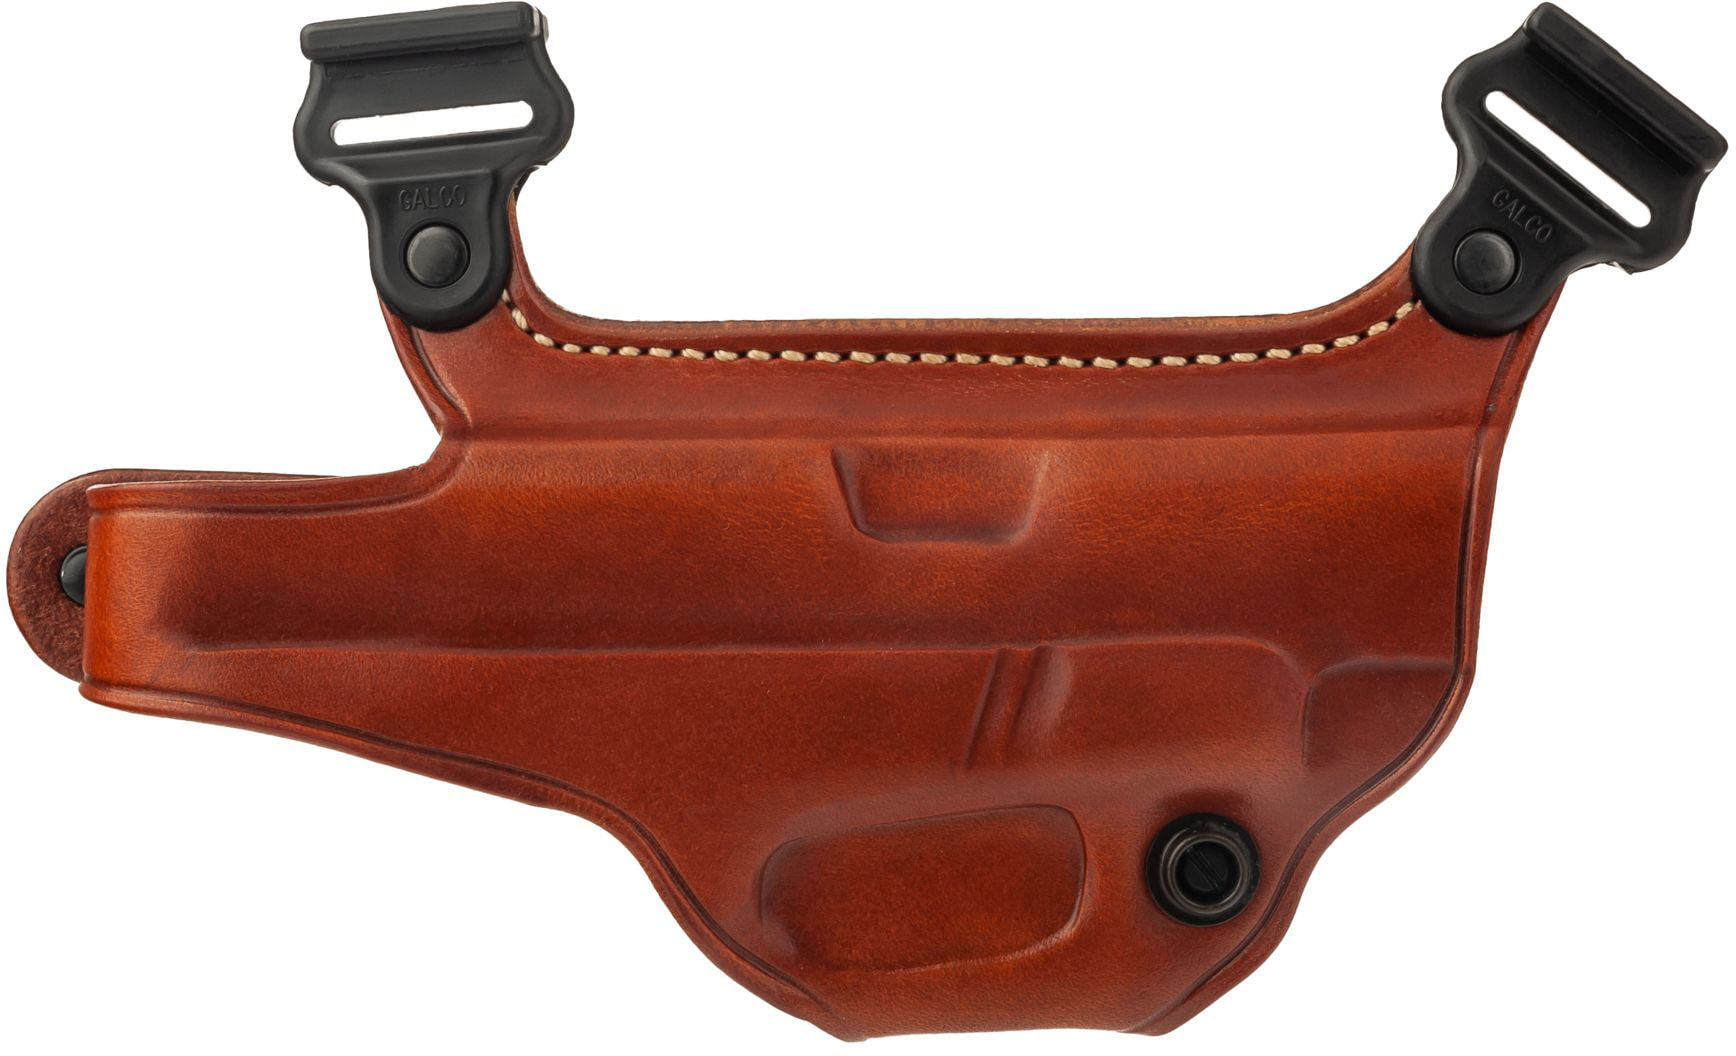 Galco S3H Shoulder Holster Component Glock 43 Tan 653